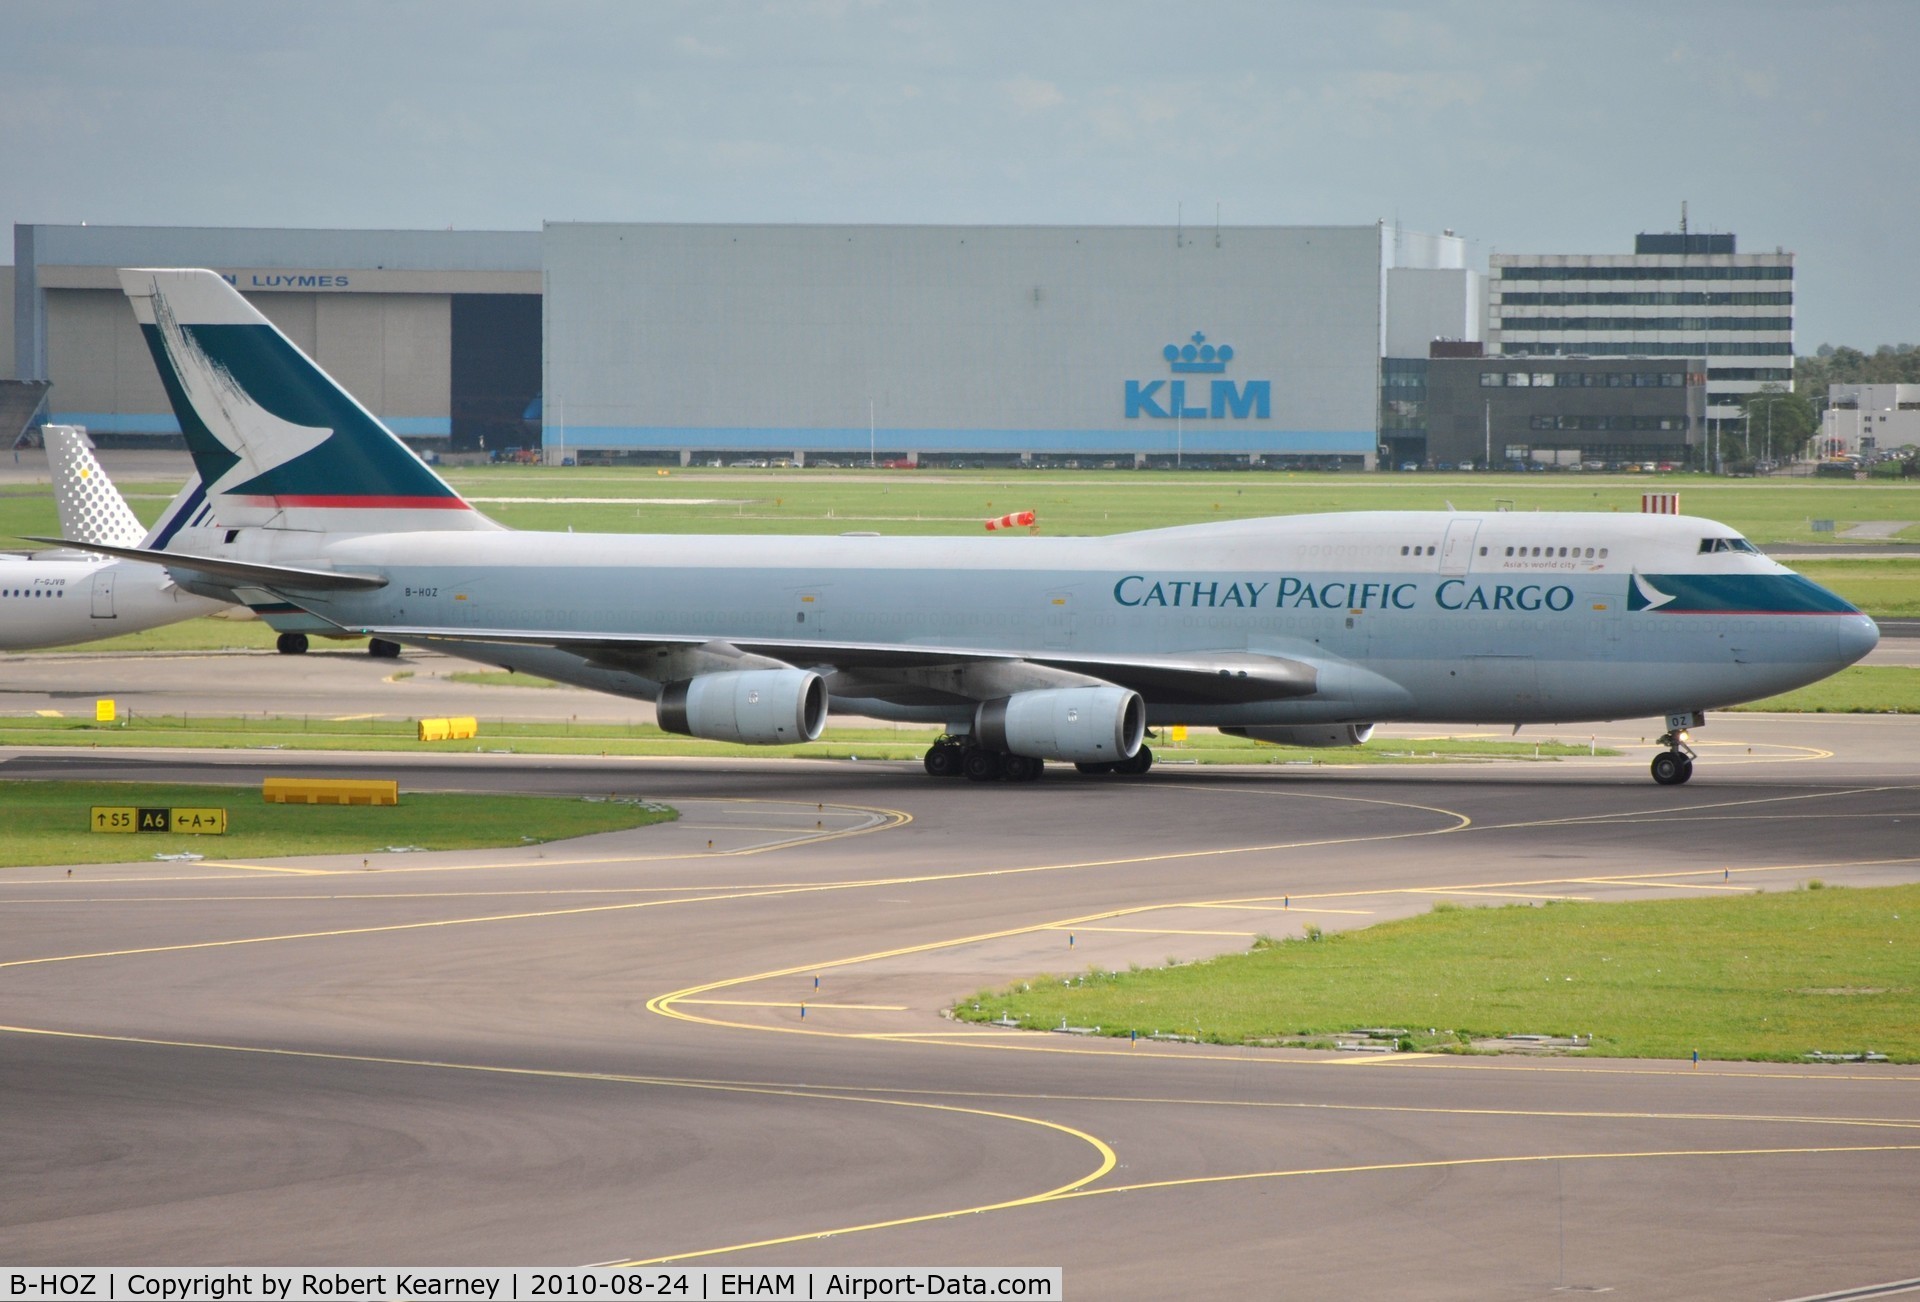 B-HOZ, 1992 Boeing 747-467/BCF C/N 25871, Cathay Cargo taxiing in after arrival